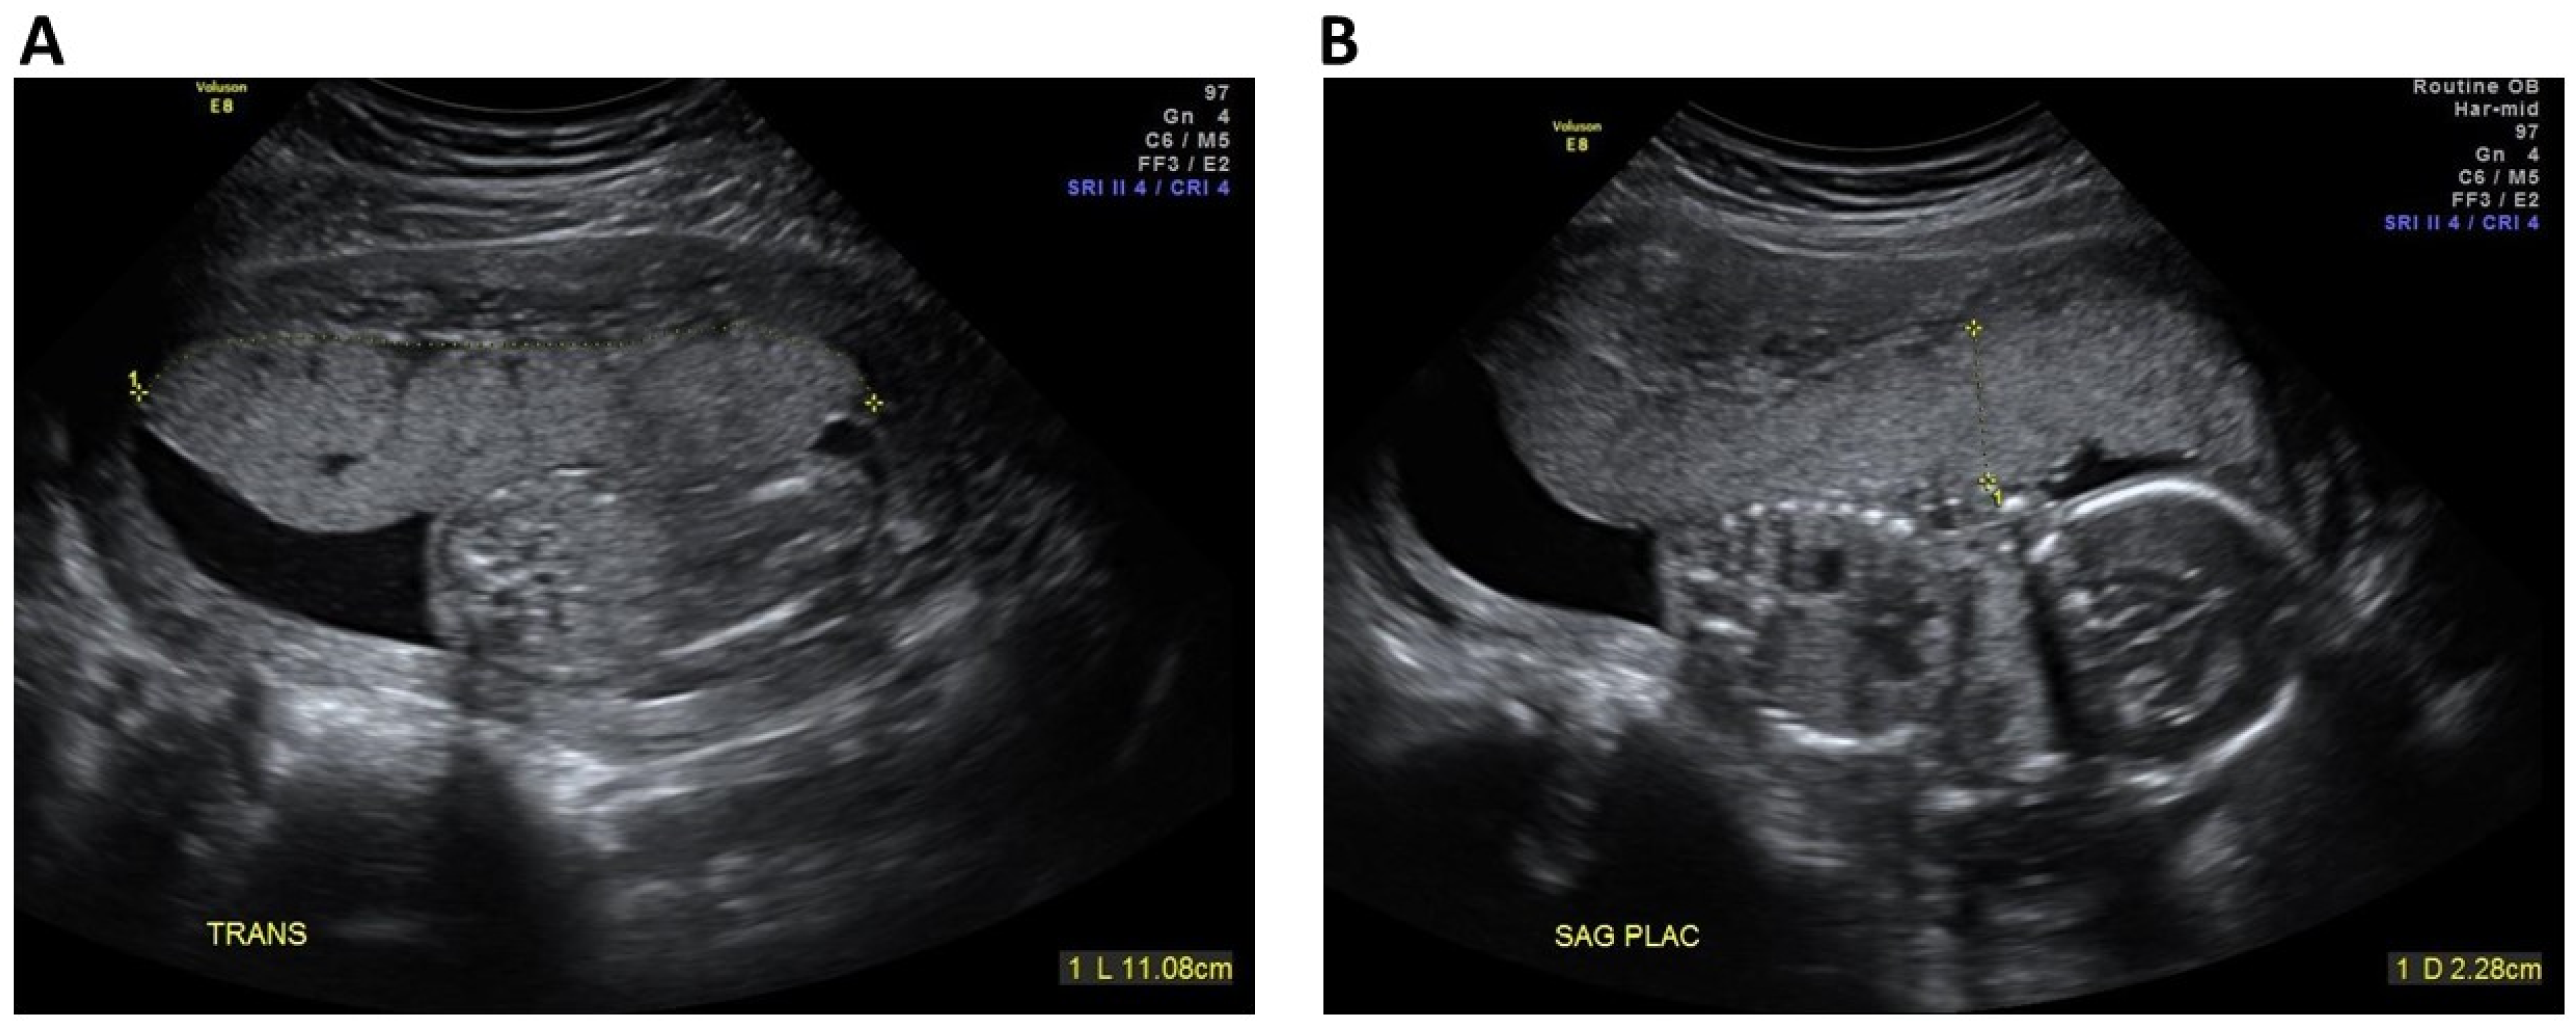 JCM | Free Full-Text | Contribution of Second Trimester Sonographic  Placental Morphology to Uterine Artery Doppler in the Prediction of Placenta-Mediated  Pregnancy Complications